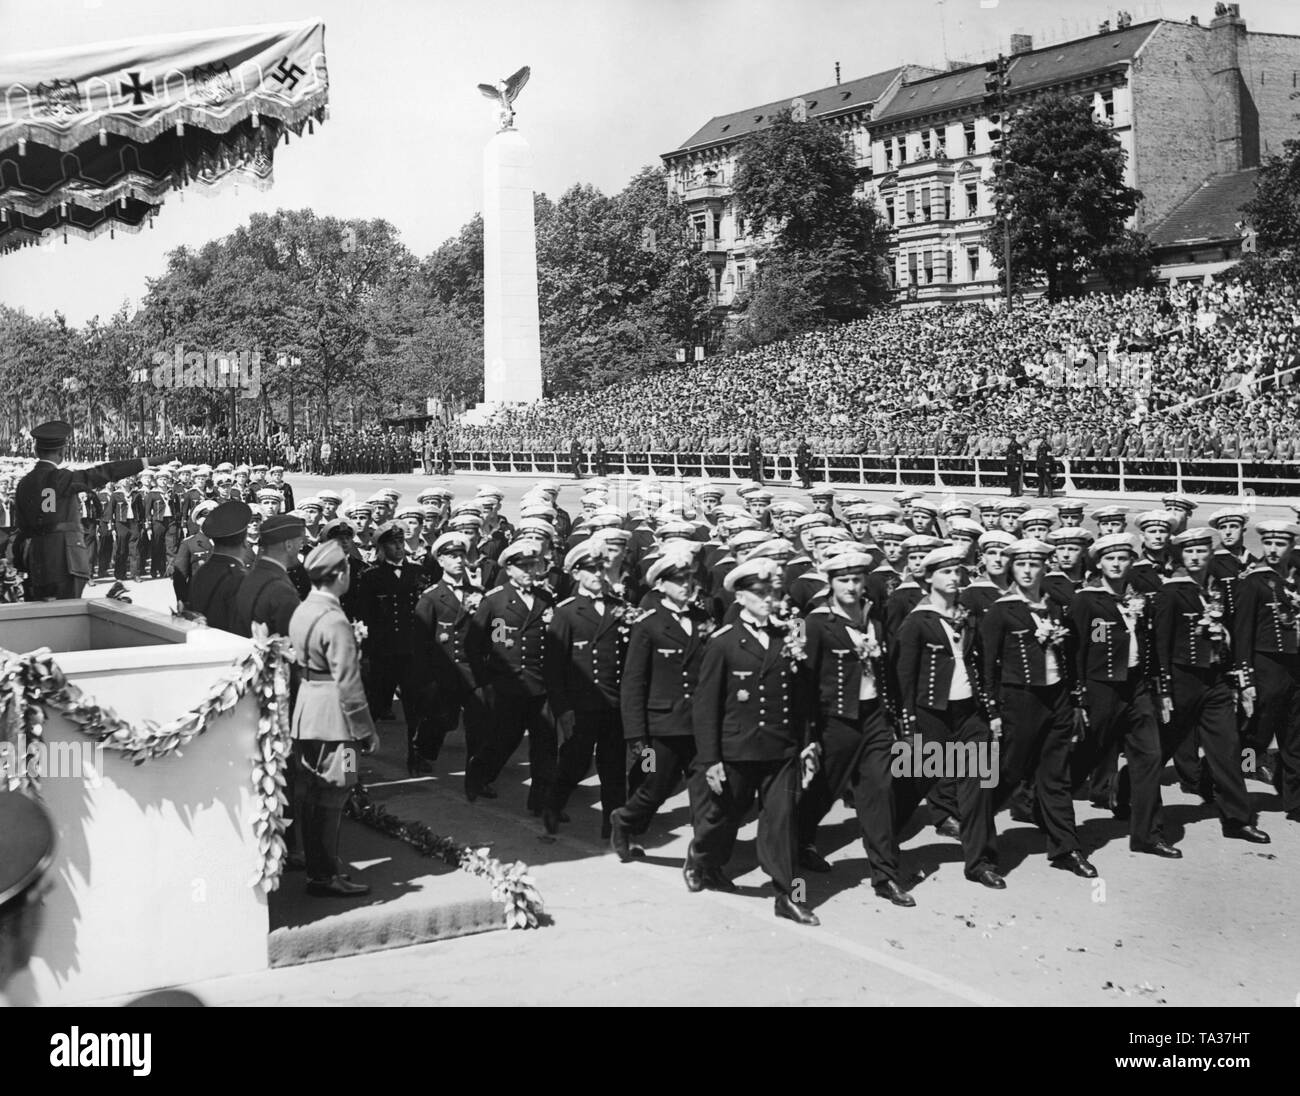 Photo of a marine formation (sailors and corporals) marching in front of officers of the Wehrmacht and leader, Adolf Hitler (under a canopy), at the parade of the Condor Legion on the East-West Axis (former Chalottenburger Chaussee, today Strasse des 17. Juni ) in front of the Technische Universitaet on June 6, 1939. Stock Photo